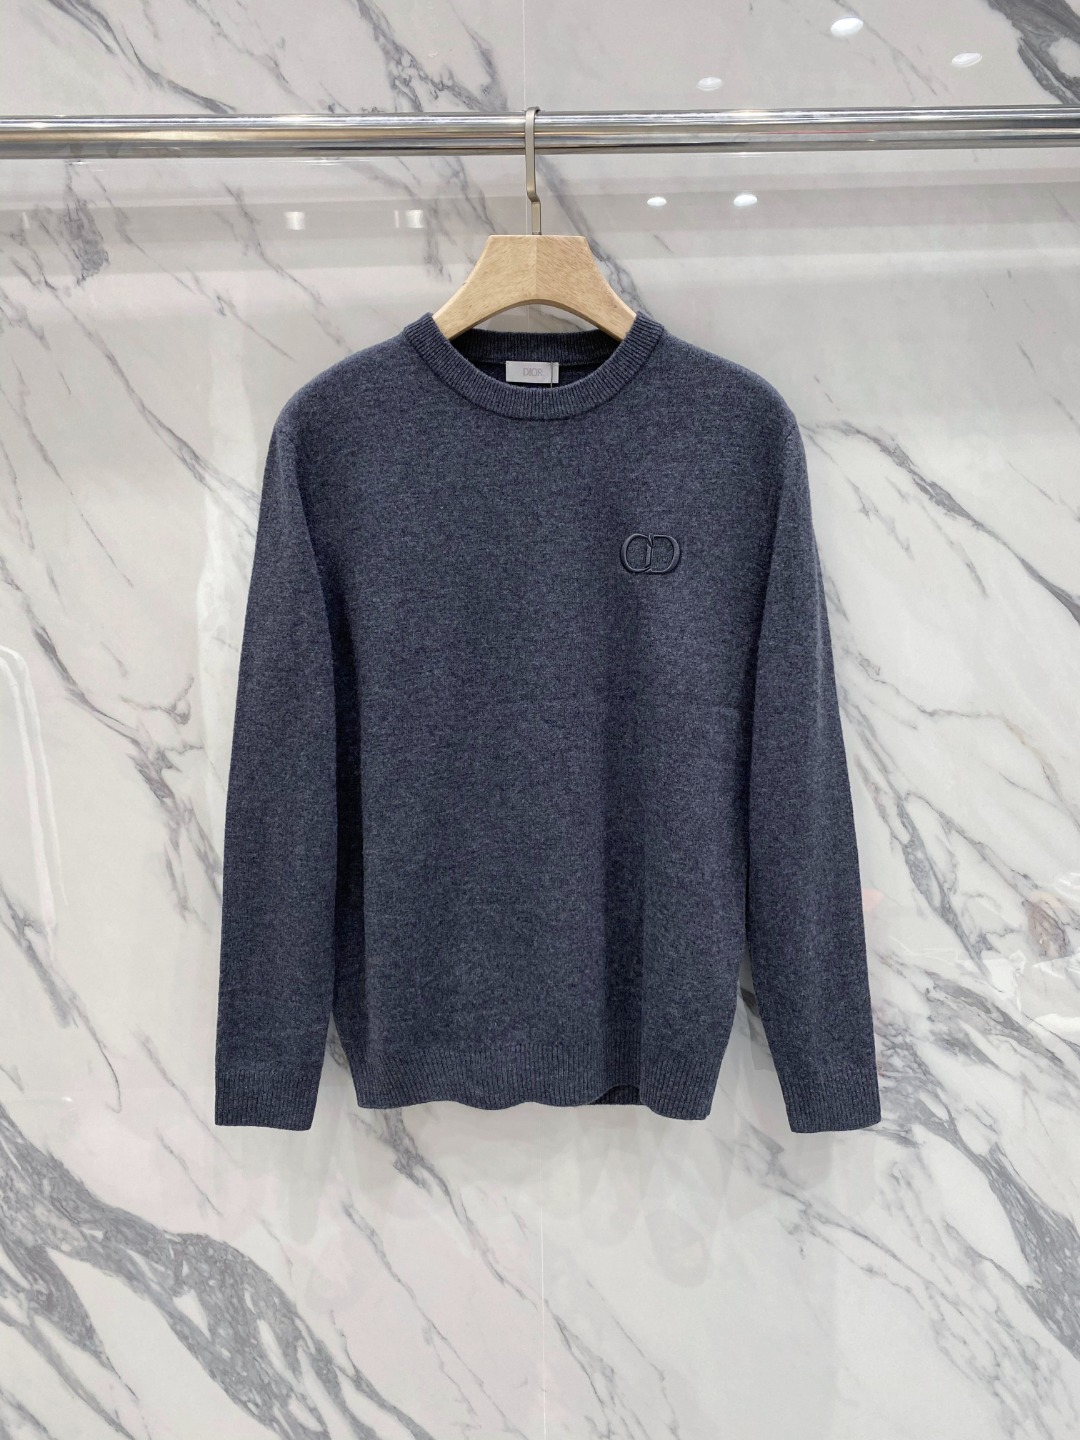 Best Site For Replica
 Dior Sale
 Clothing Sweatshirts Cashmere Spandex Wool Fall/Winter Collection